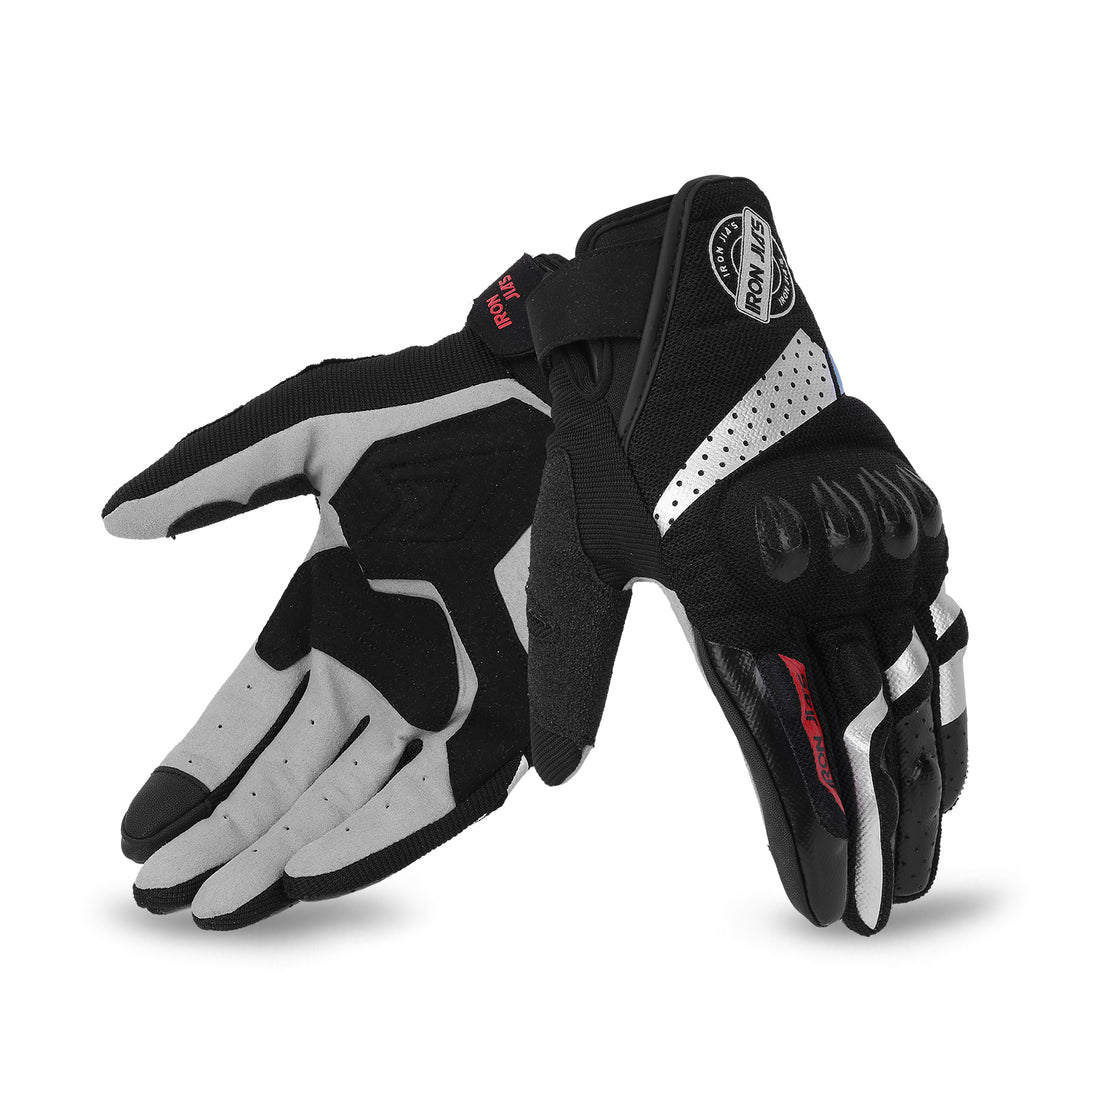 IRON JIA'S RIDING GLOVES, Motorcycles, Motorcycle Apparel on Carousell